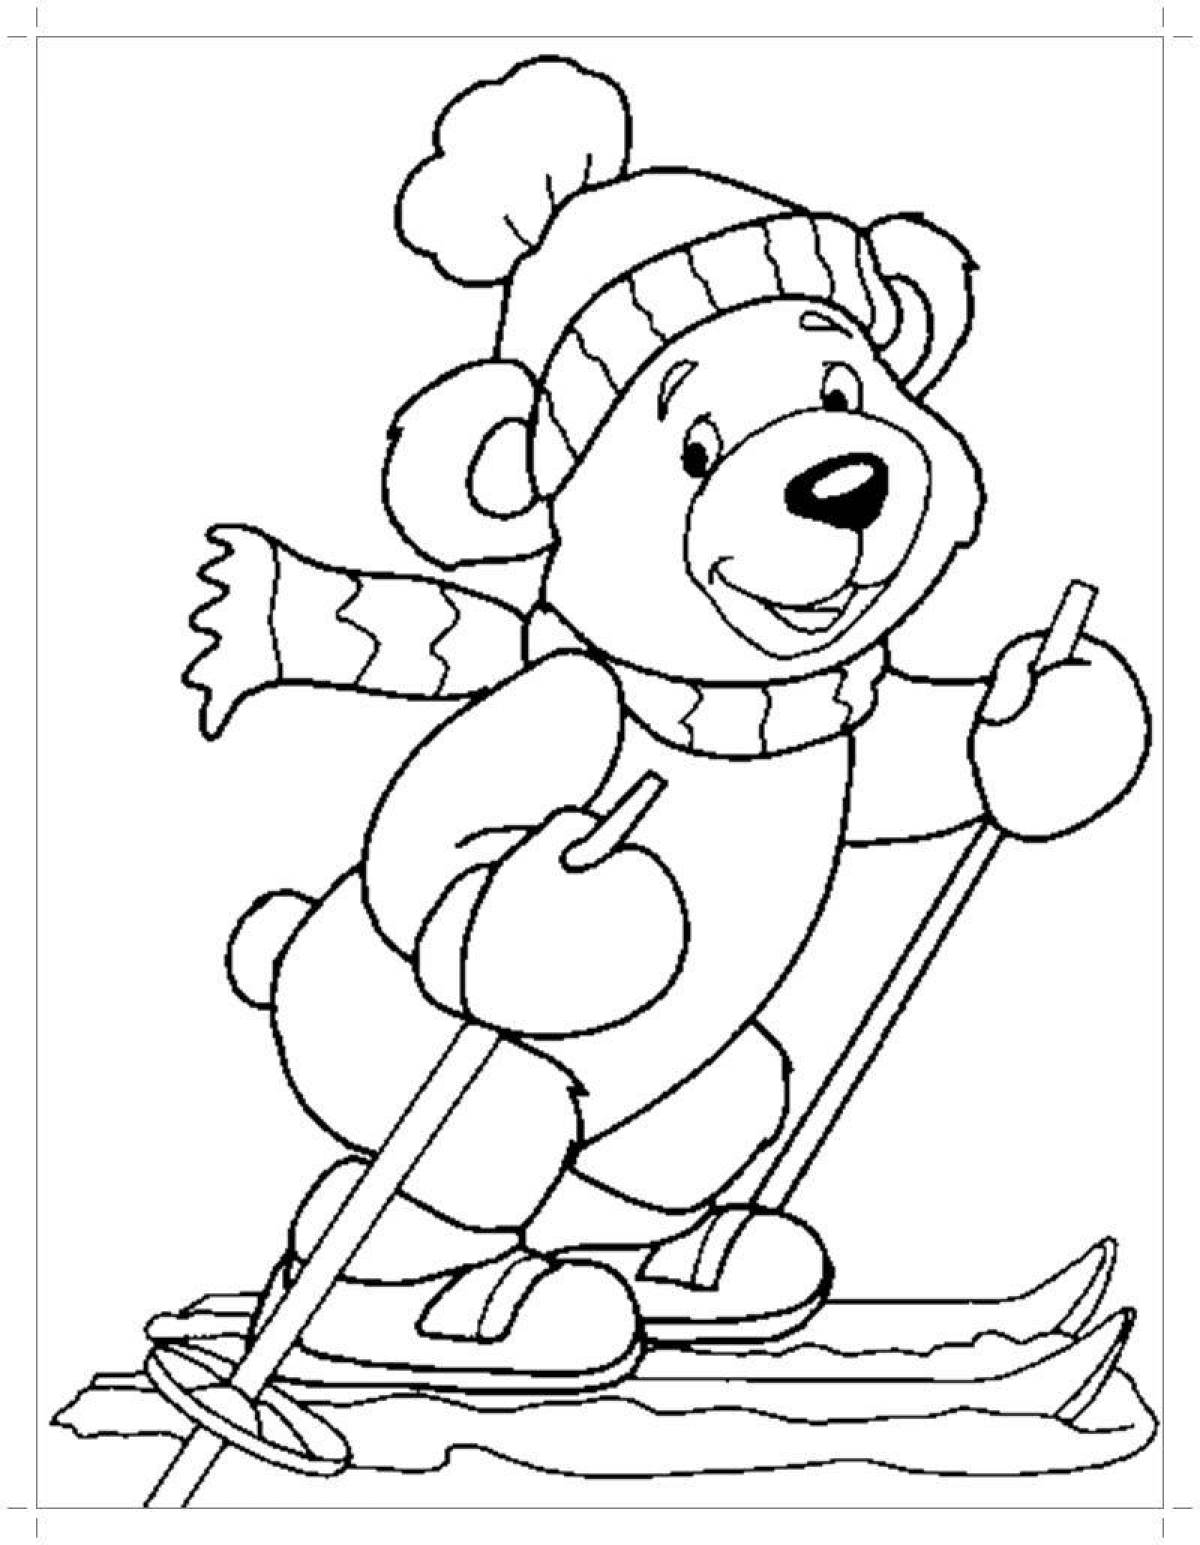 Playful coloring bear in winter